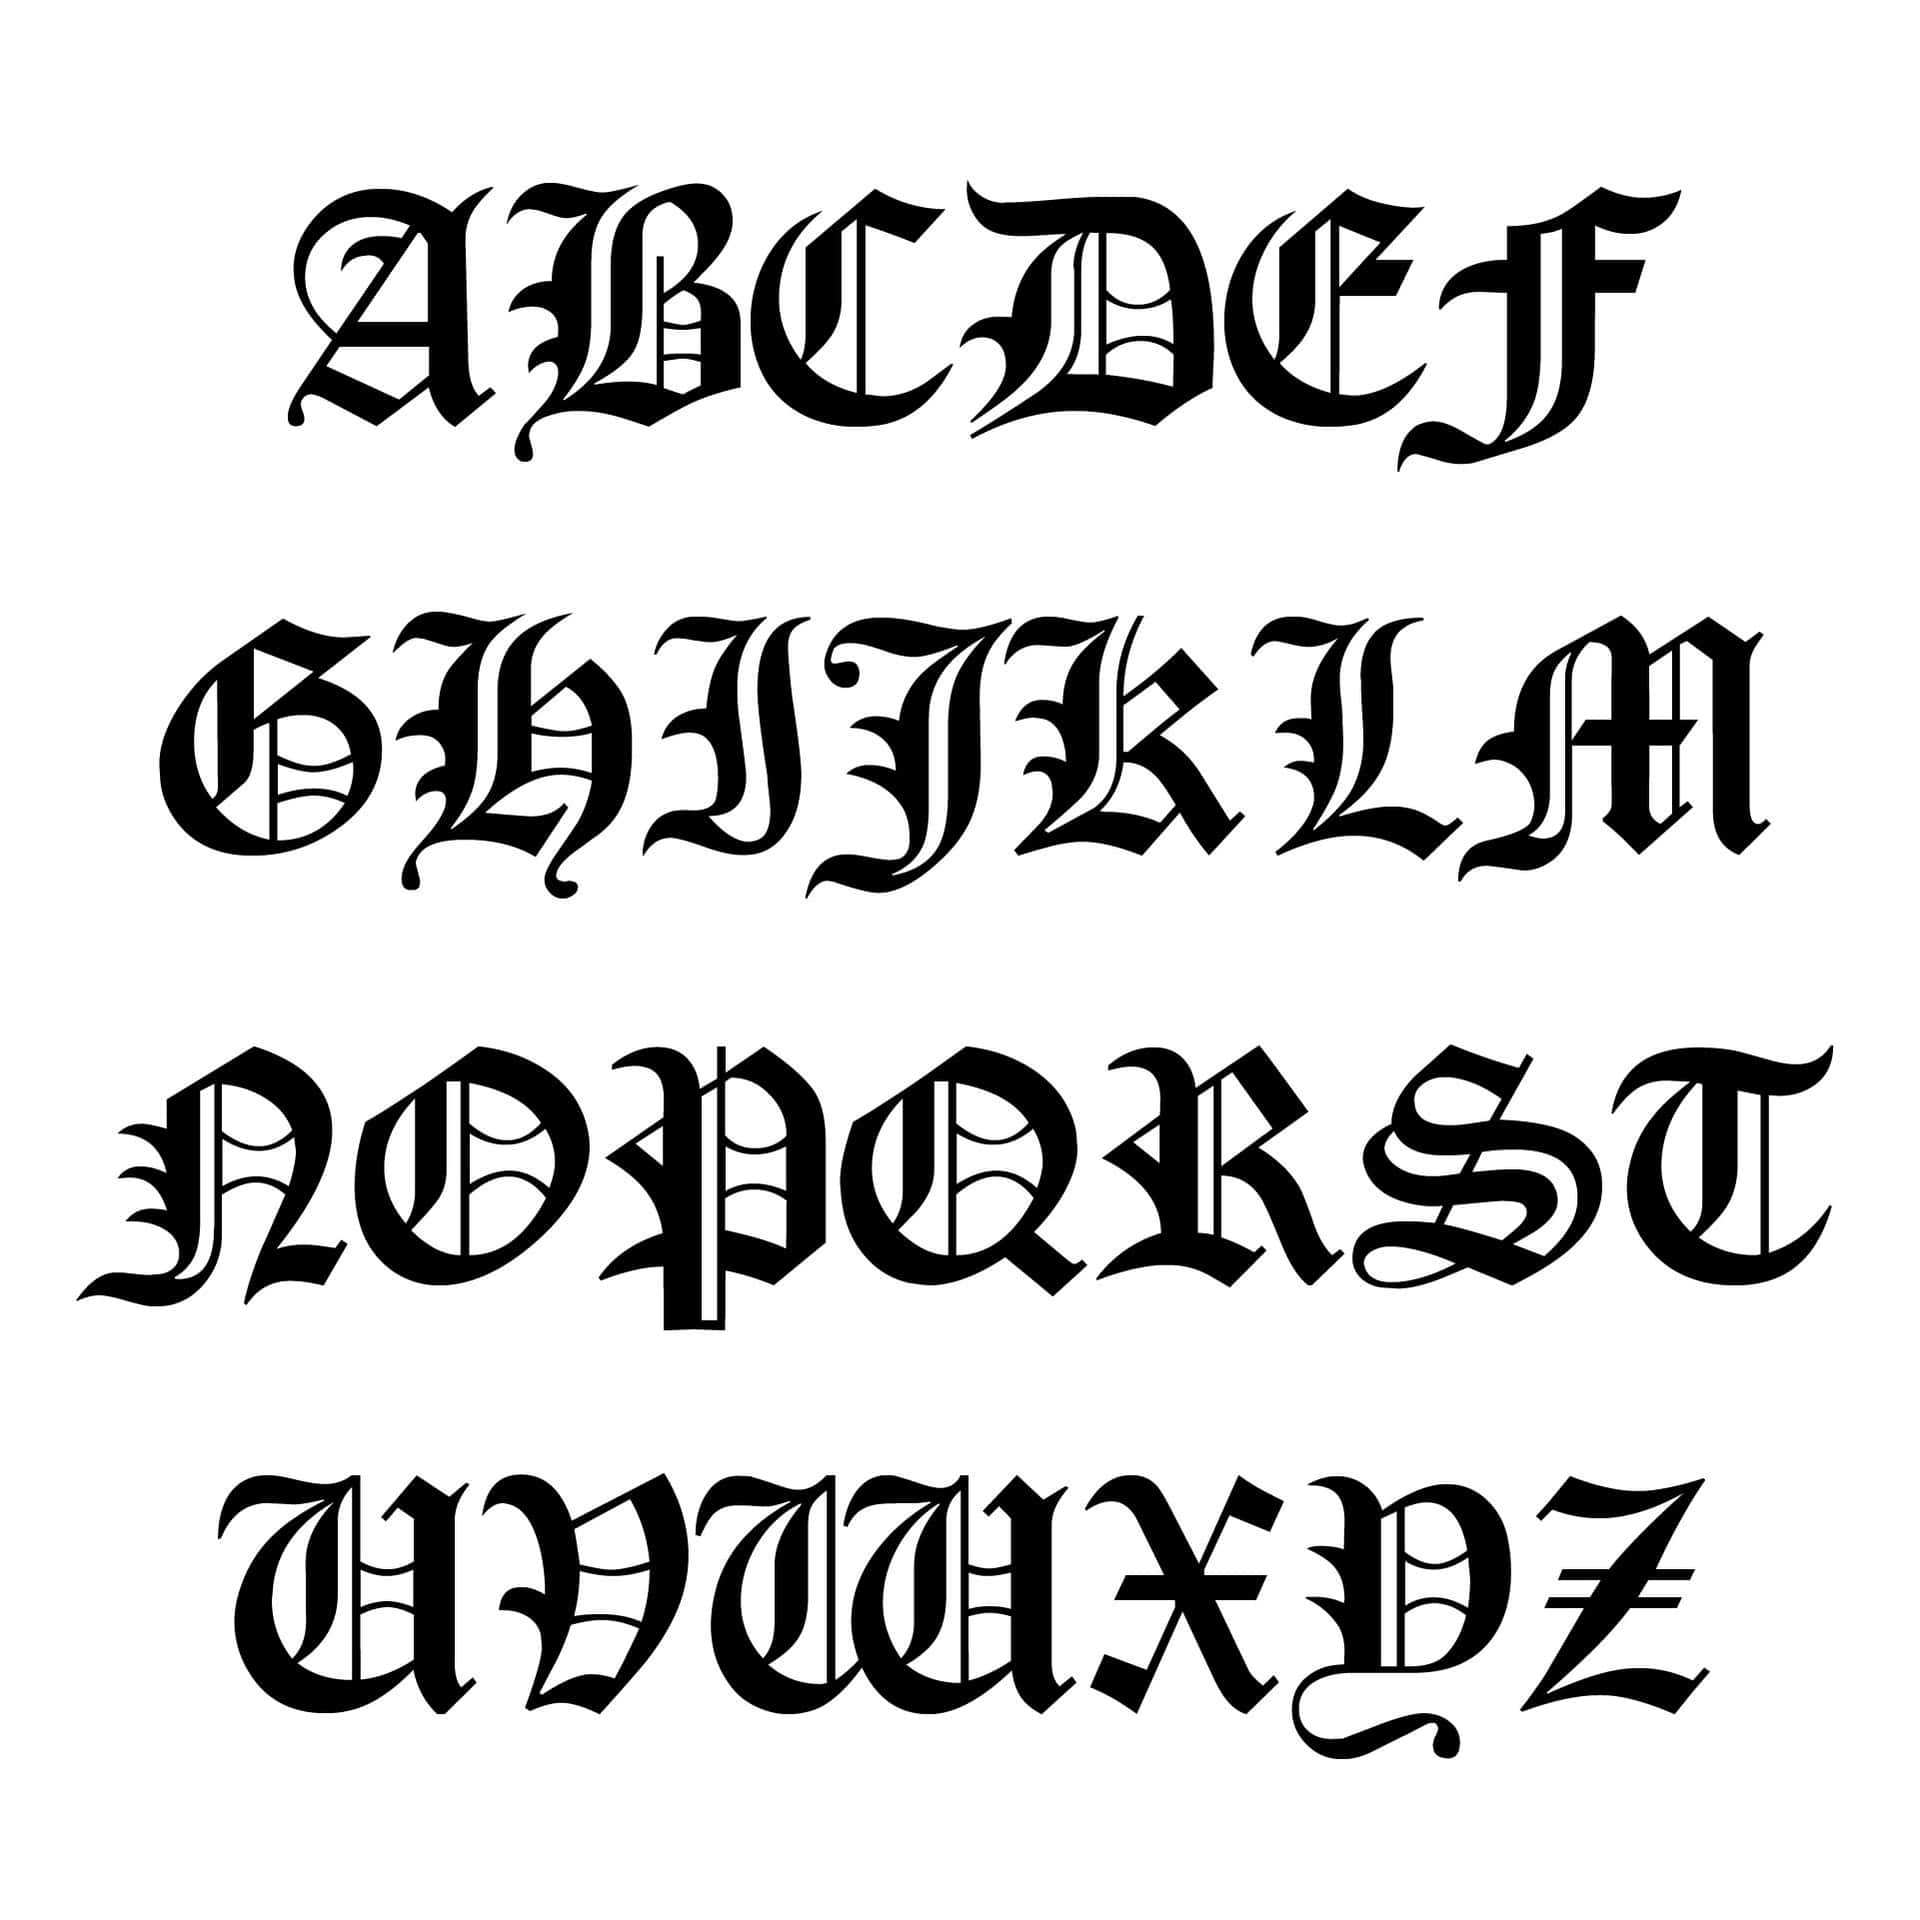 A Black And White Font With A Black And White Background